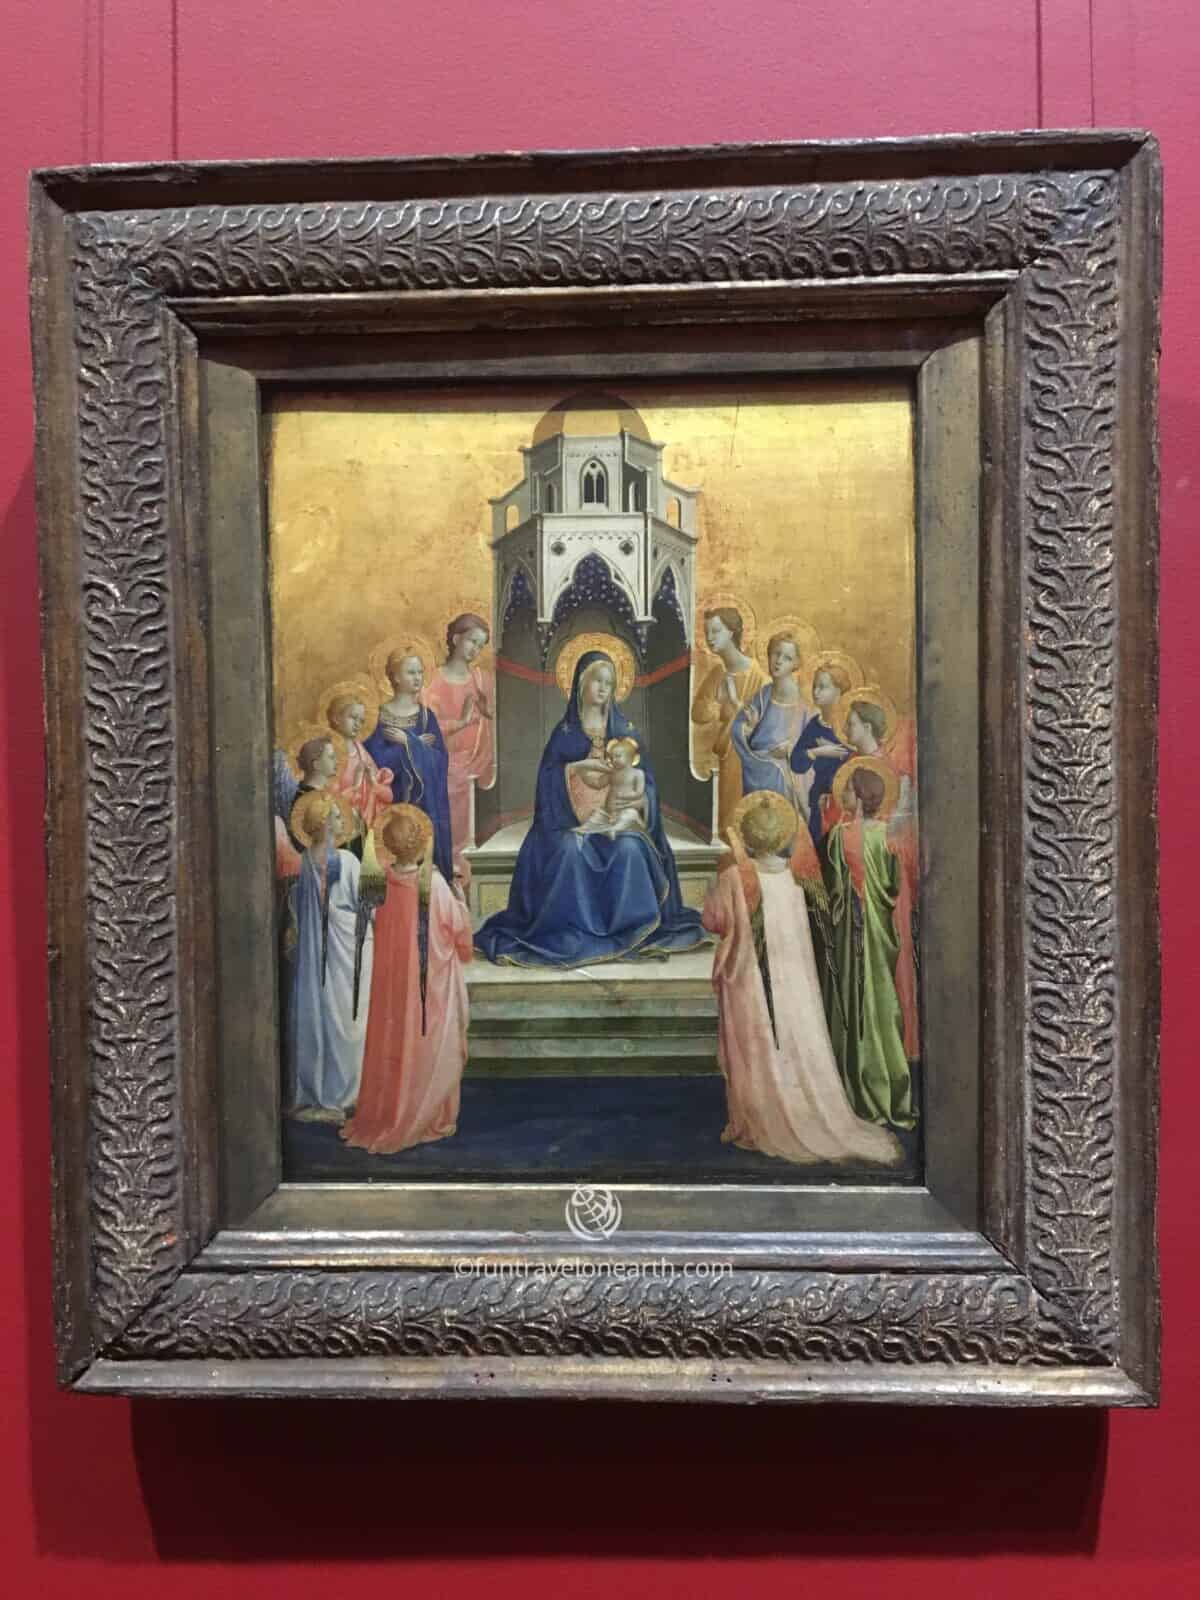 FRA ANGELICO「Virgin and Child Enthroned, Surrounded by Twelve Angels」, Städel Museum